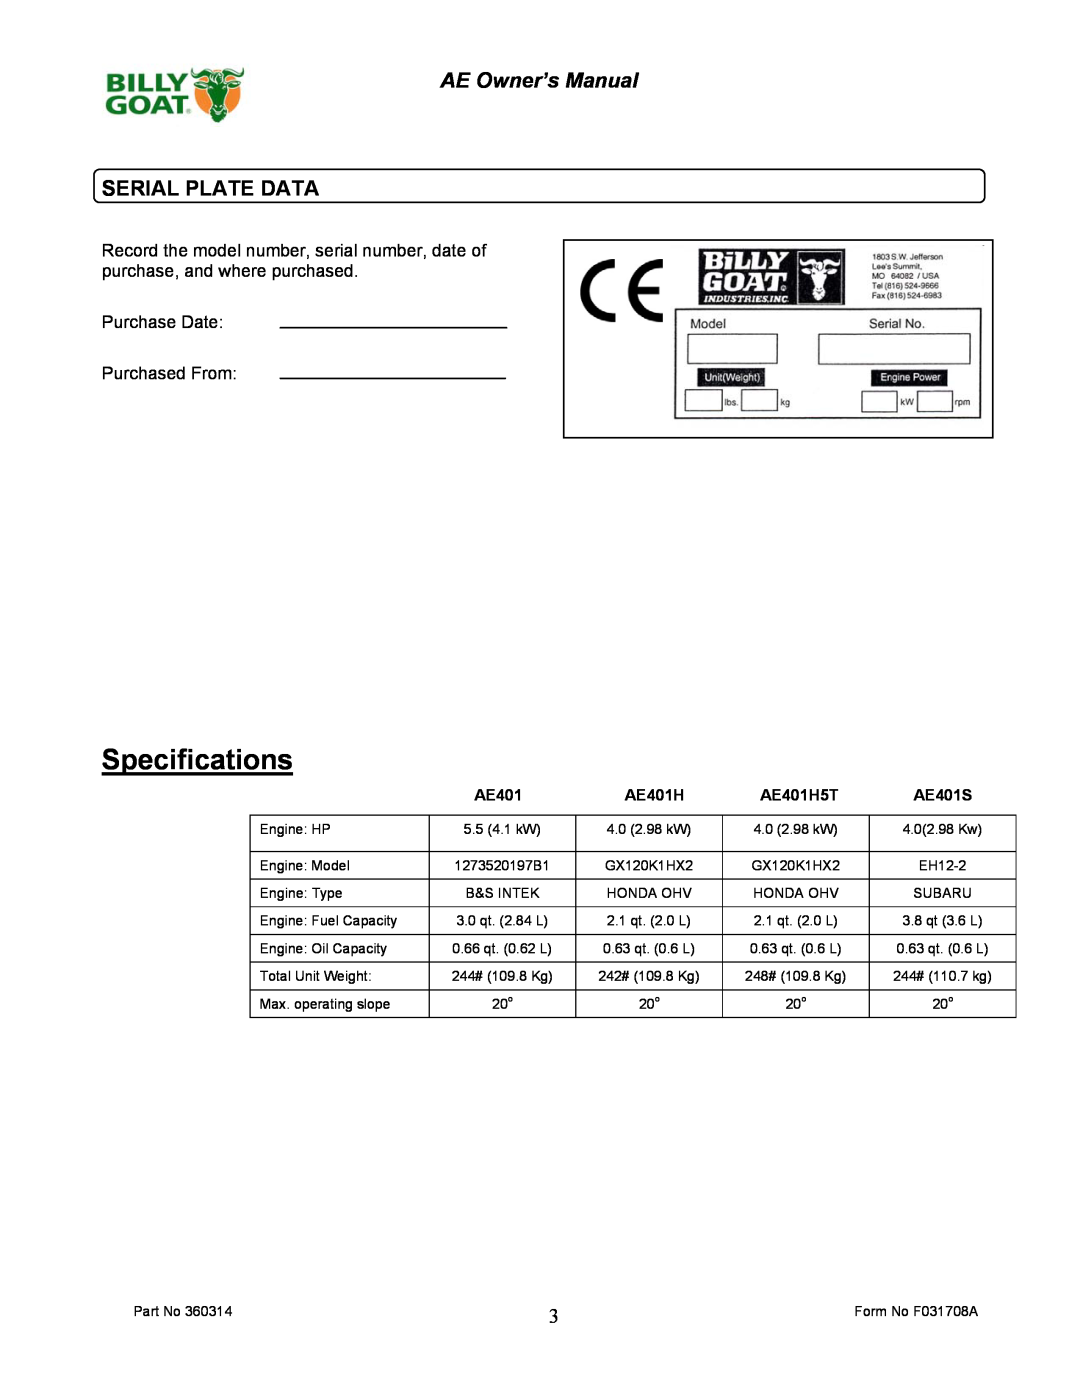 Billy Goat AE401HST owner manual Serial Plate Data, Specifications, AE Owner’s Manual, AE401H5T, AE401S 